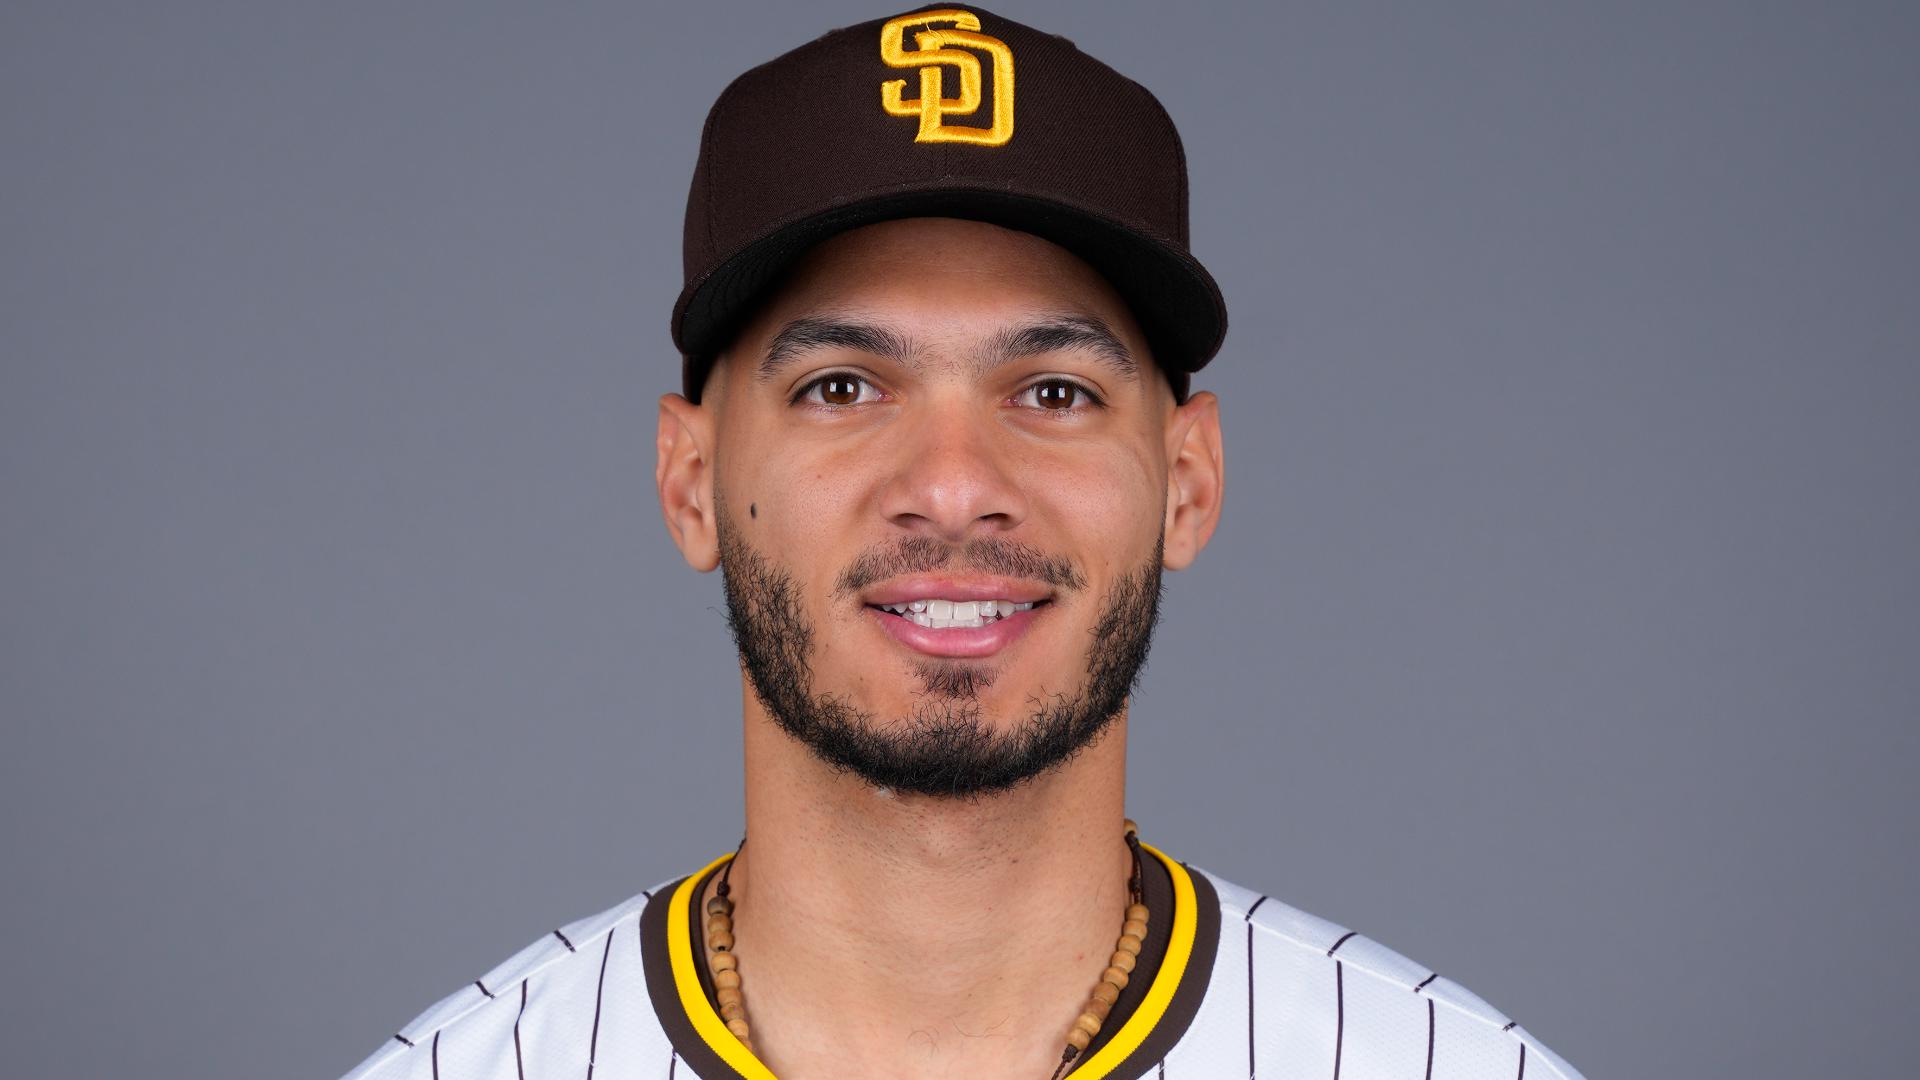 MLB is looking into allegations that infielder Tucupita Marcano bet on games involving the Pittsburgh Pirates while on the team’s injured list last season.